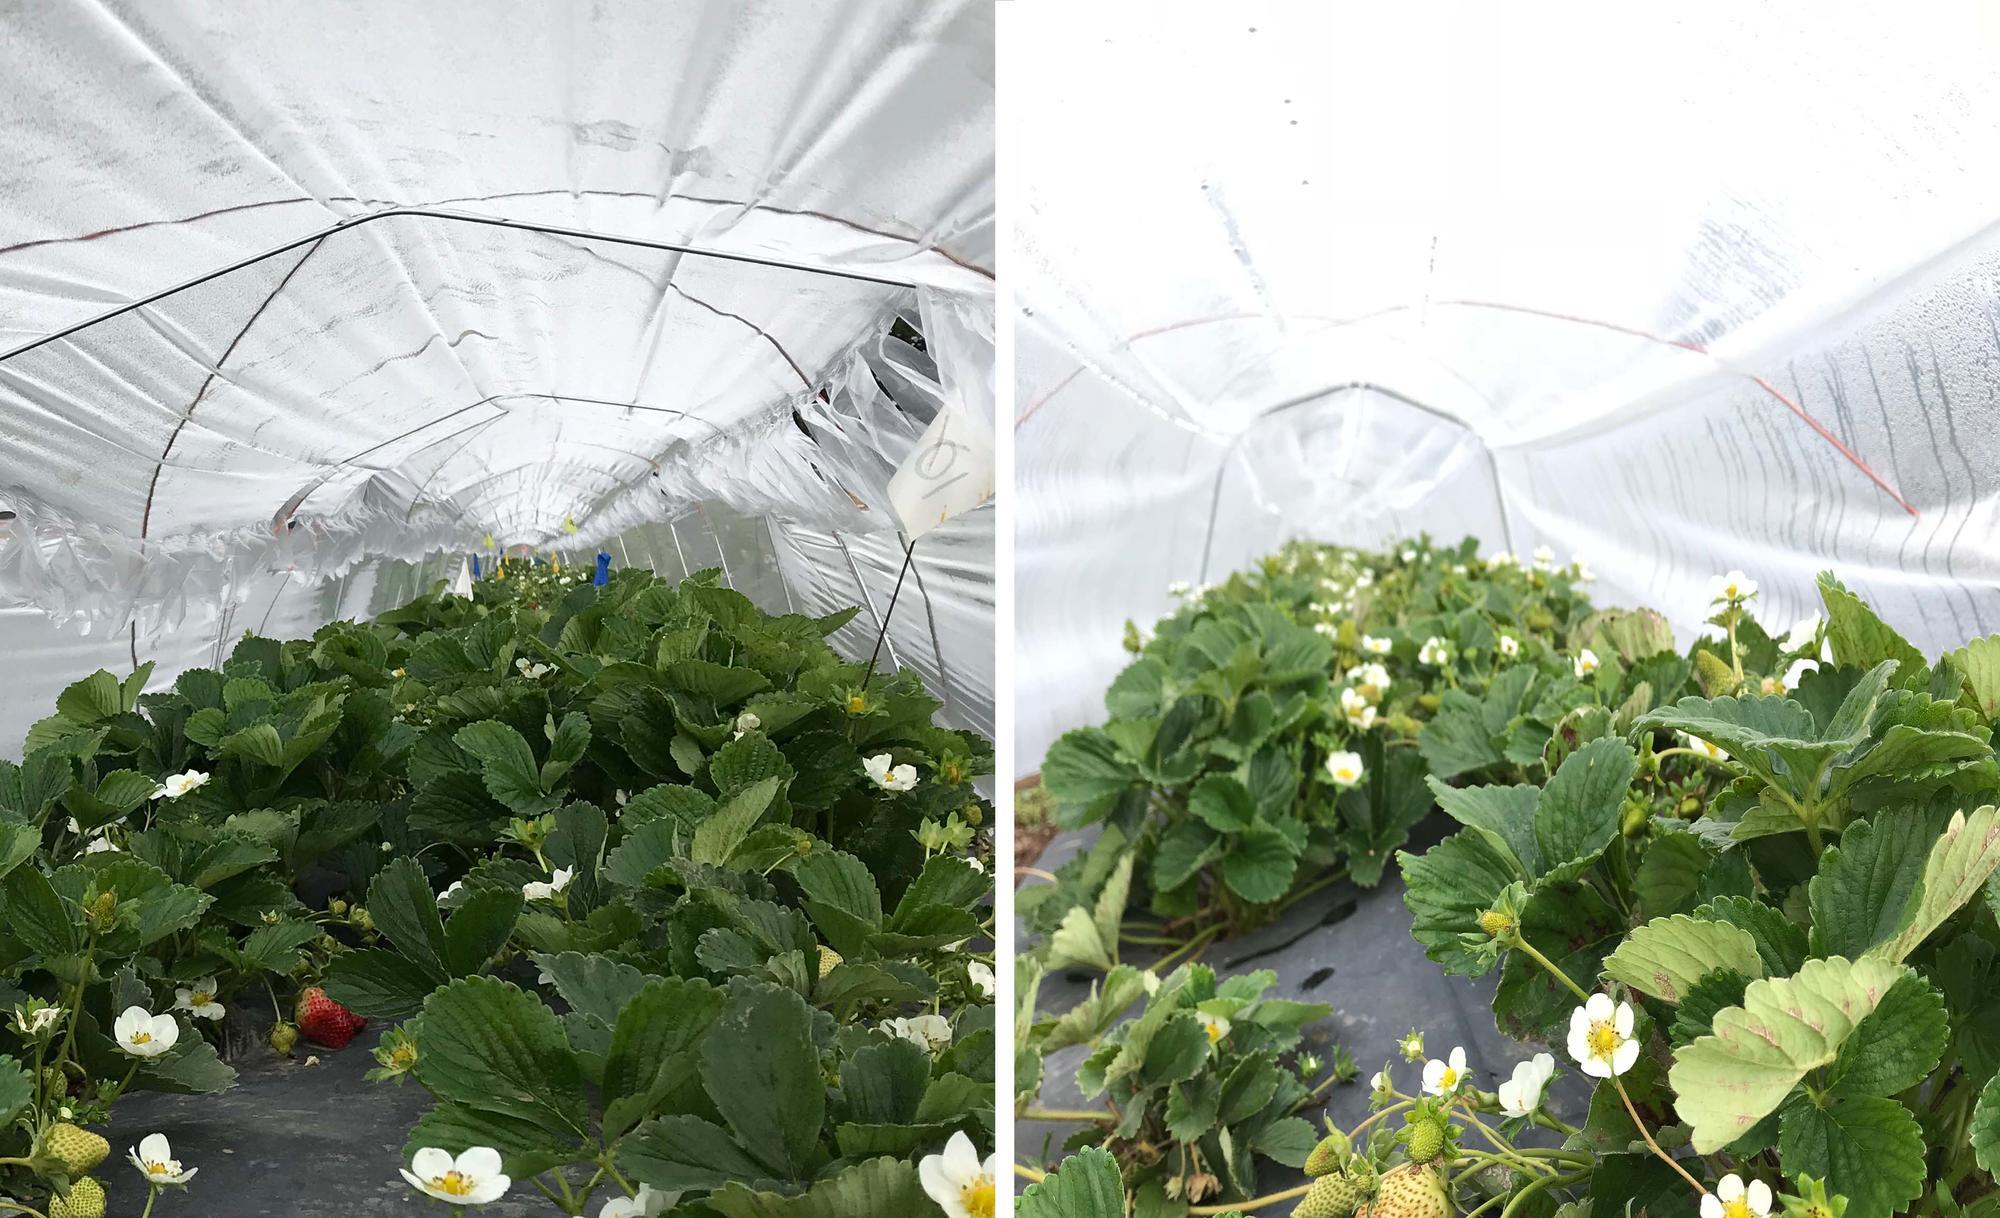 Strawberries growing under slitted plastic, left, and solid, right